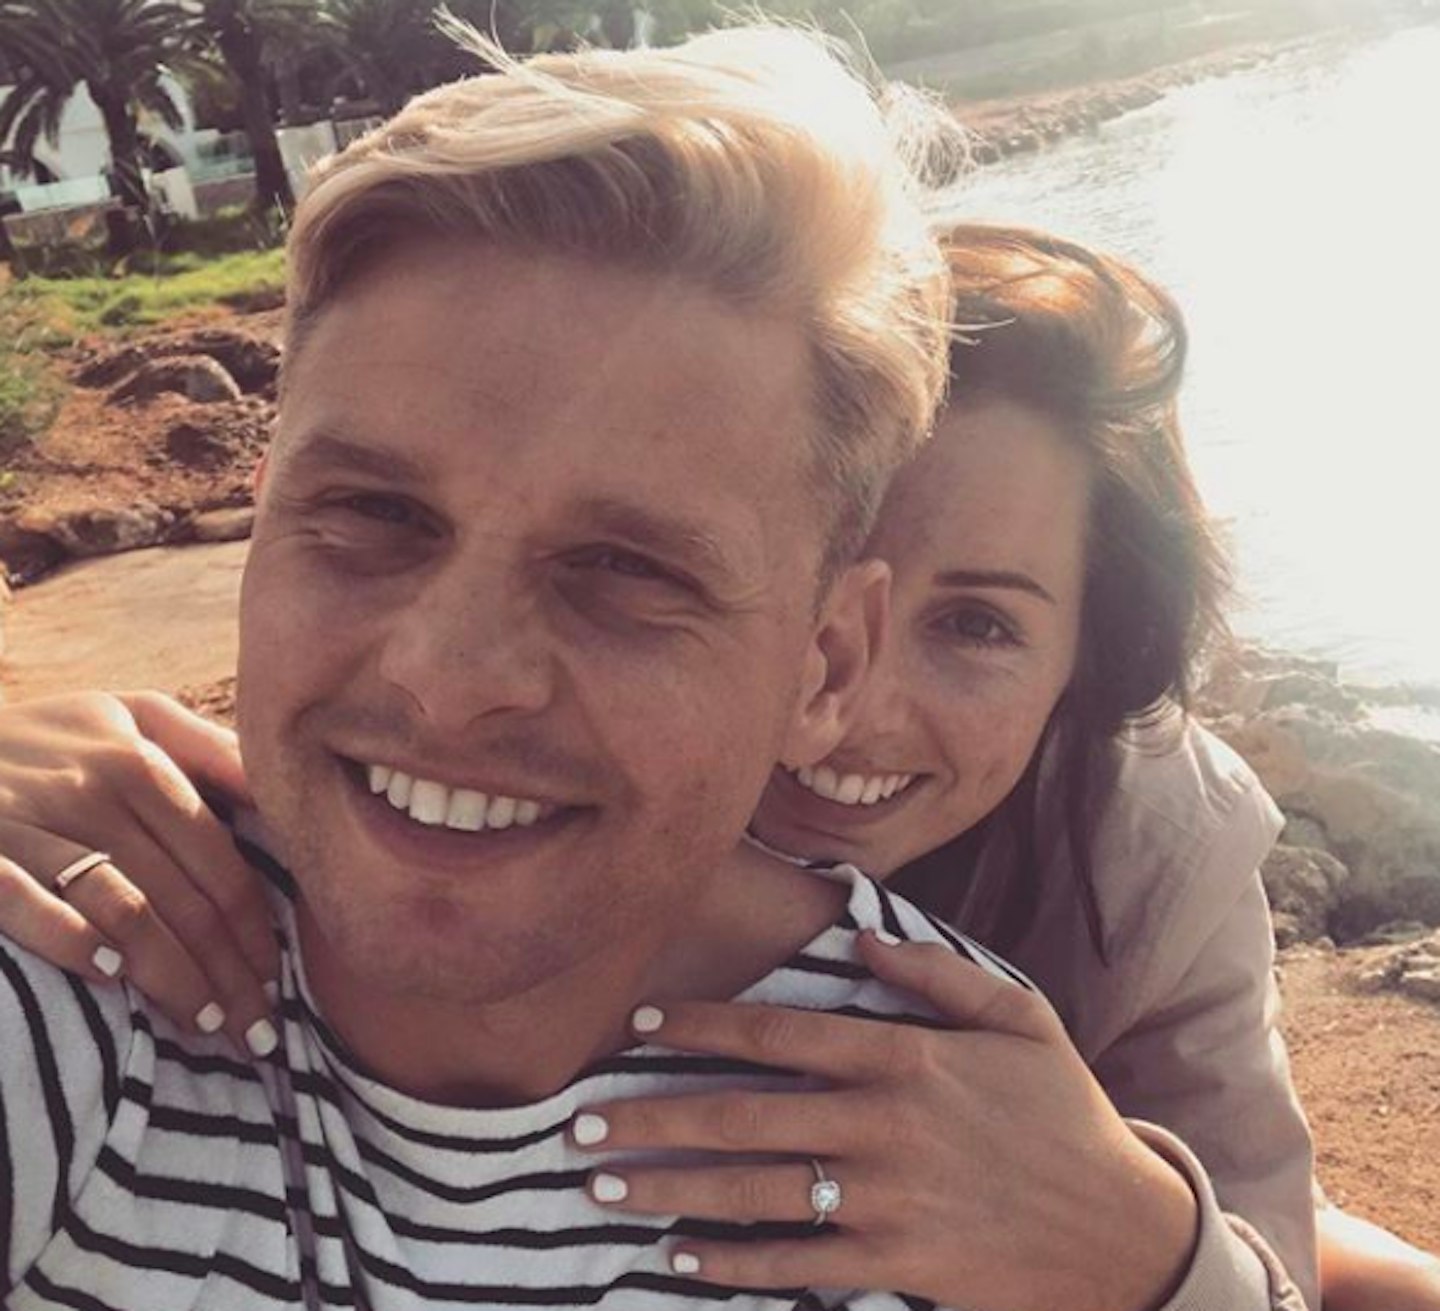 kate-dwyer-jeff-brazier-picture-sons